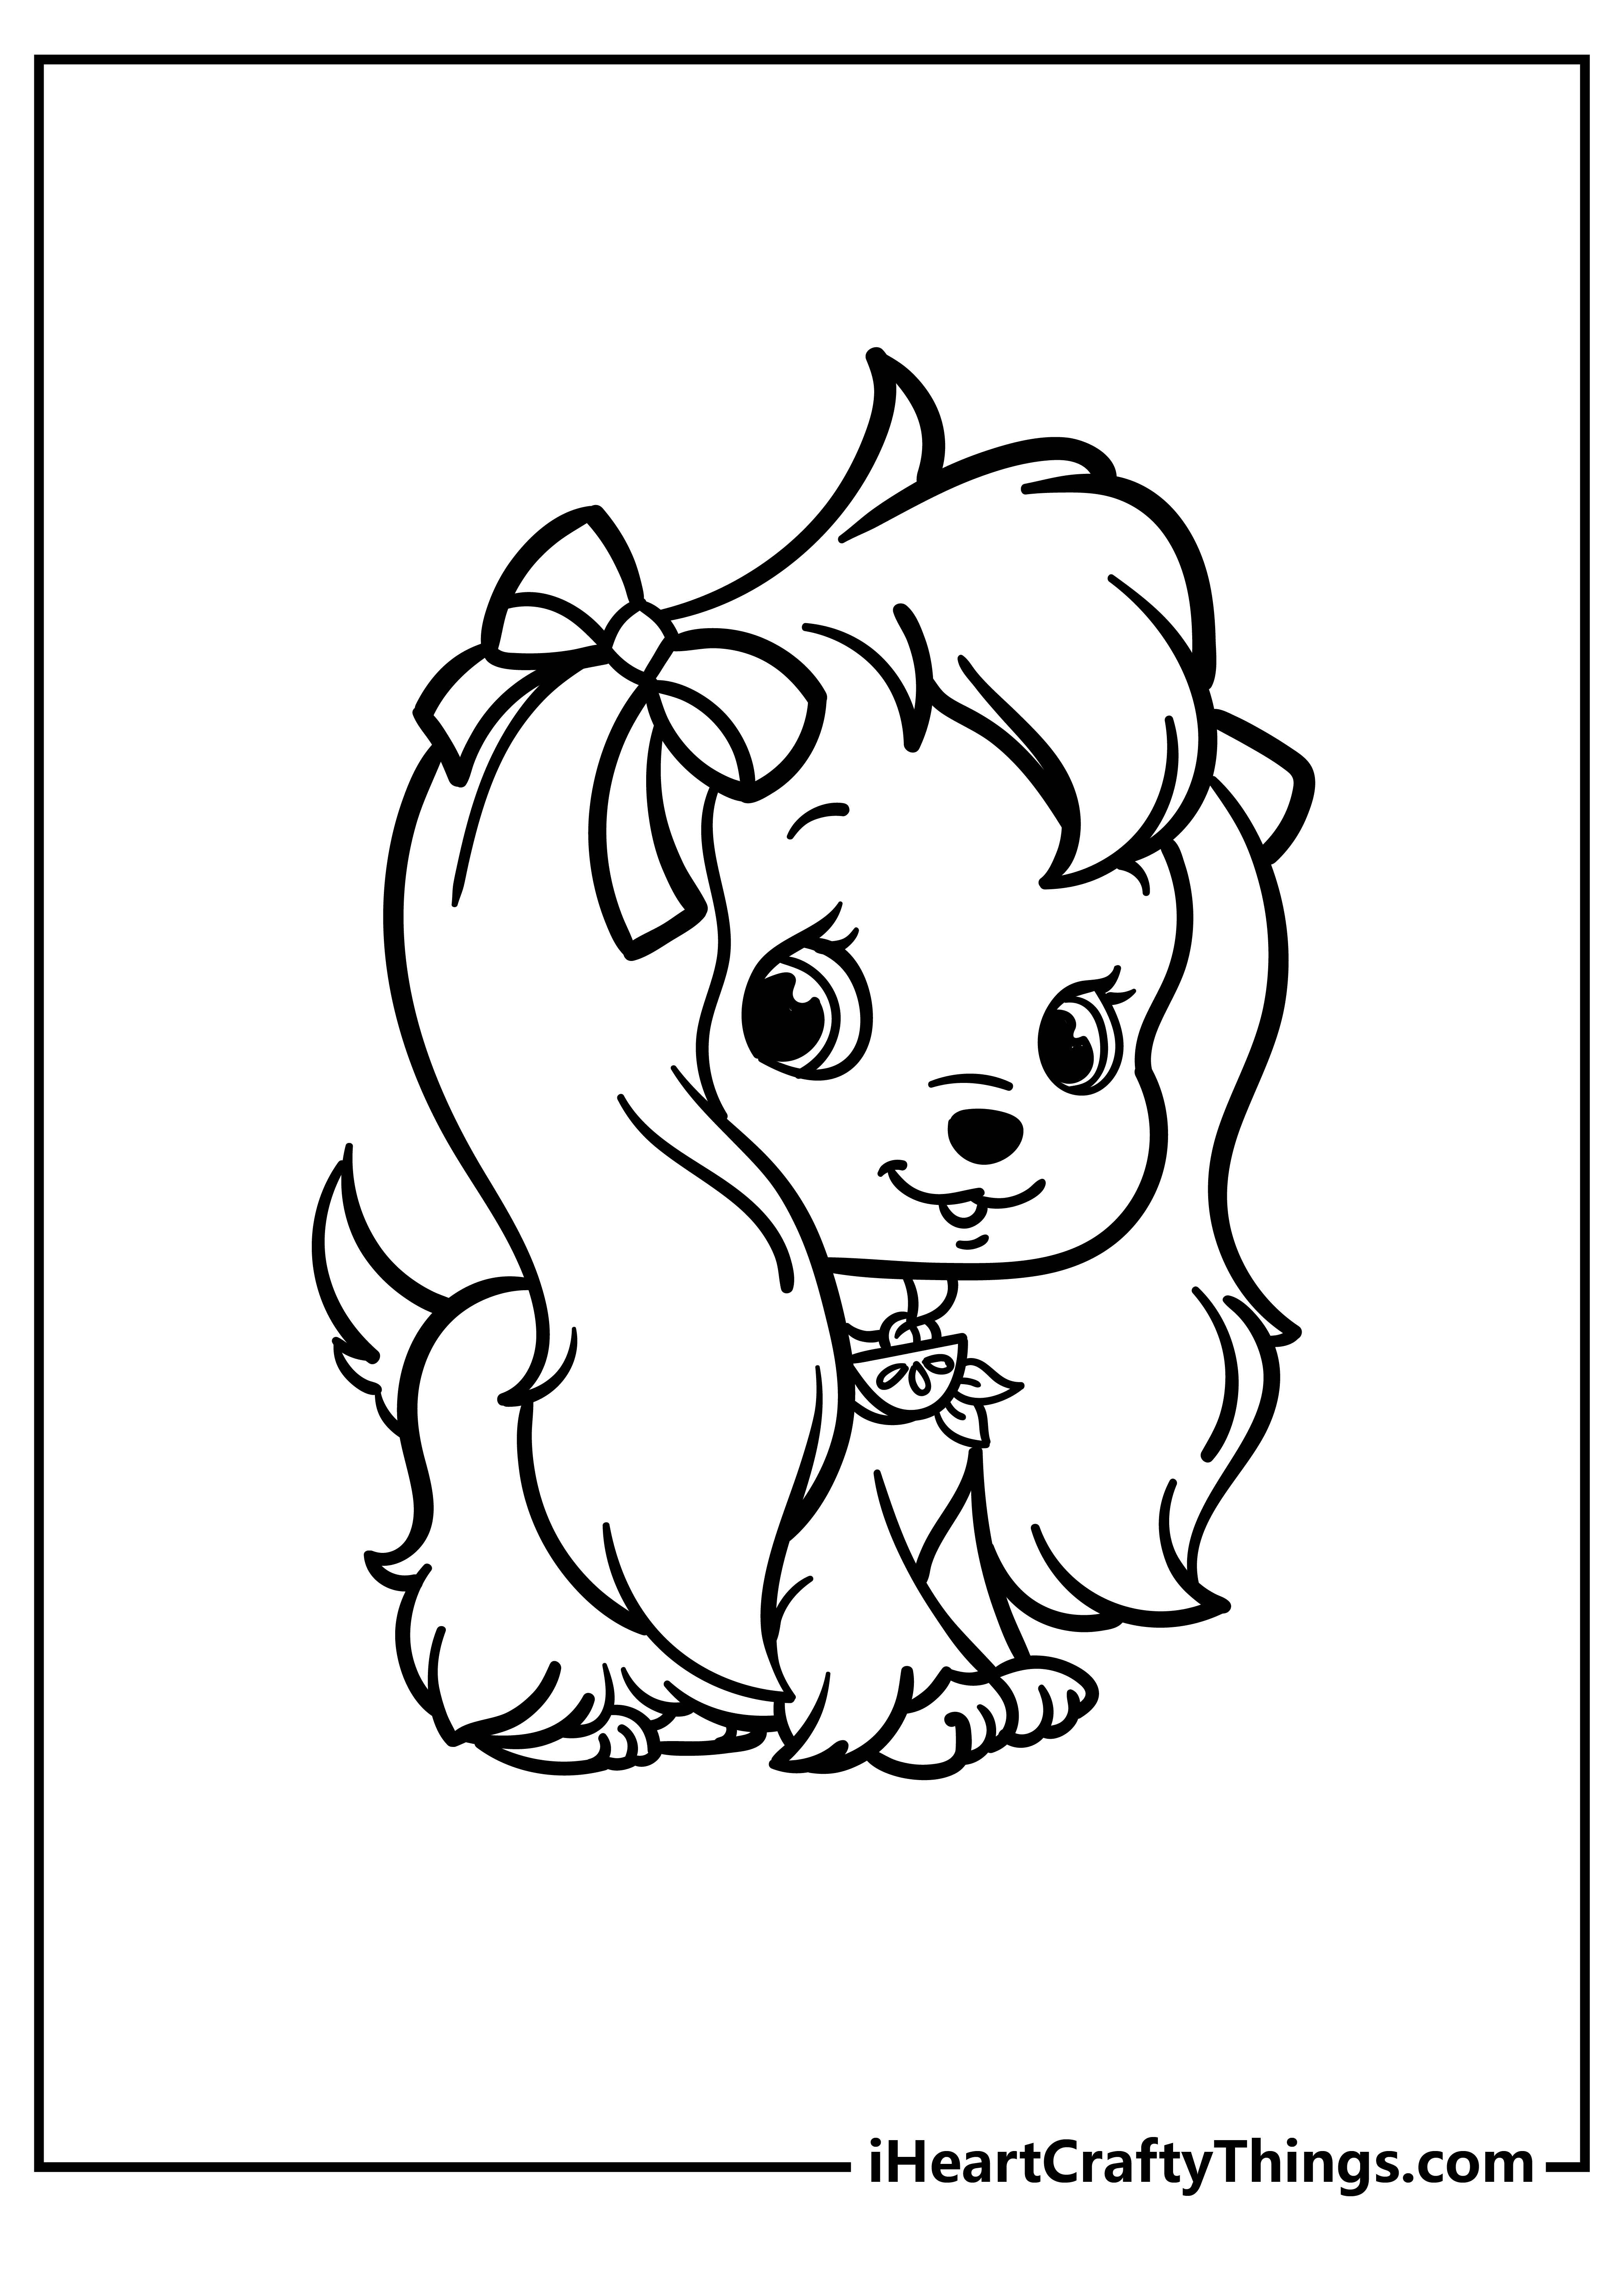 Strawberry Shortcake Coloring Pages free pdf download